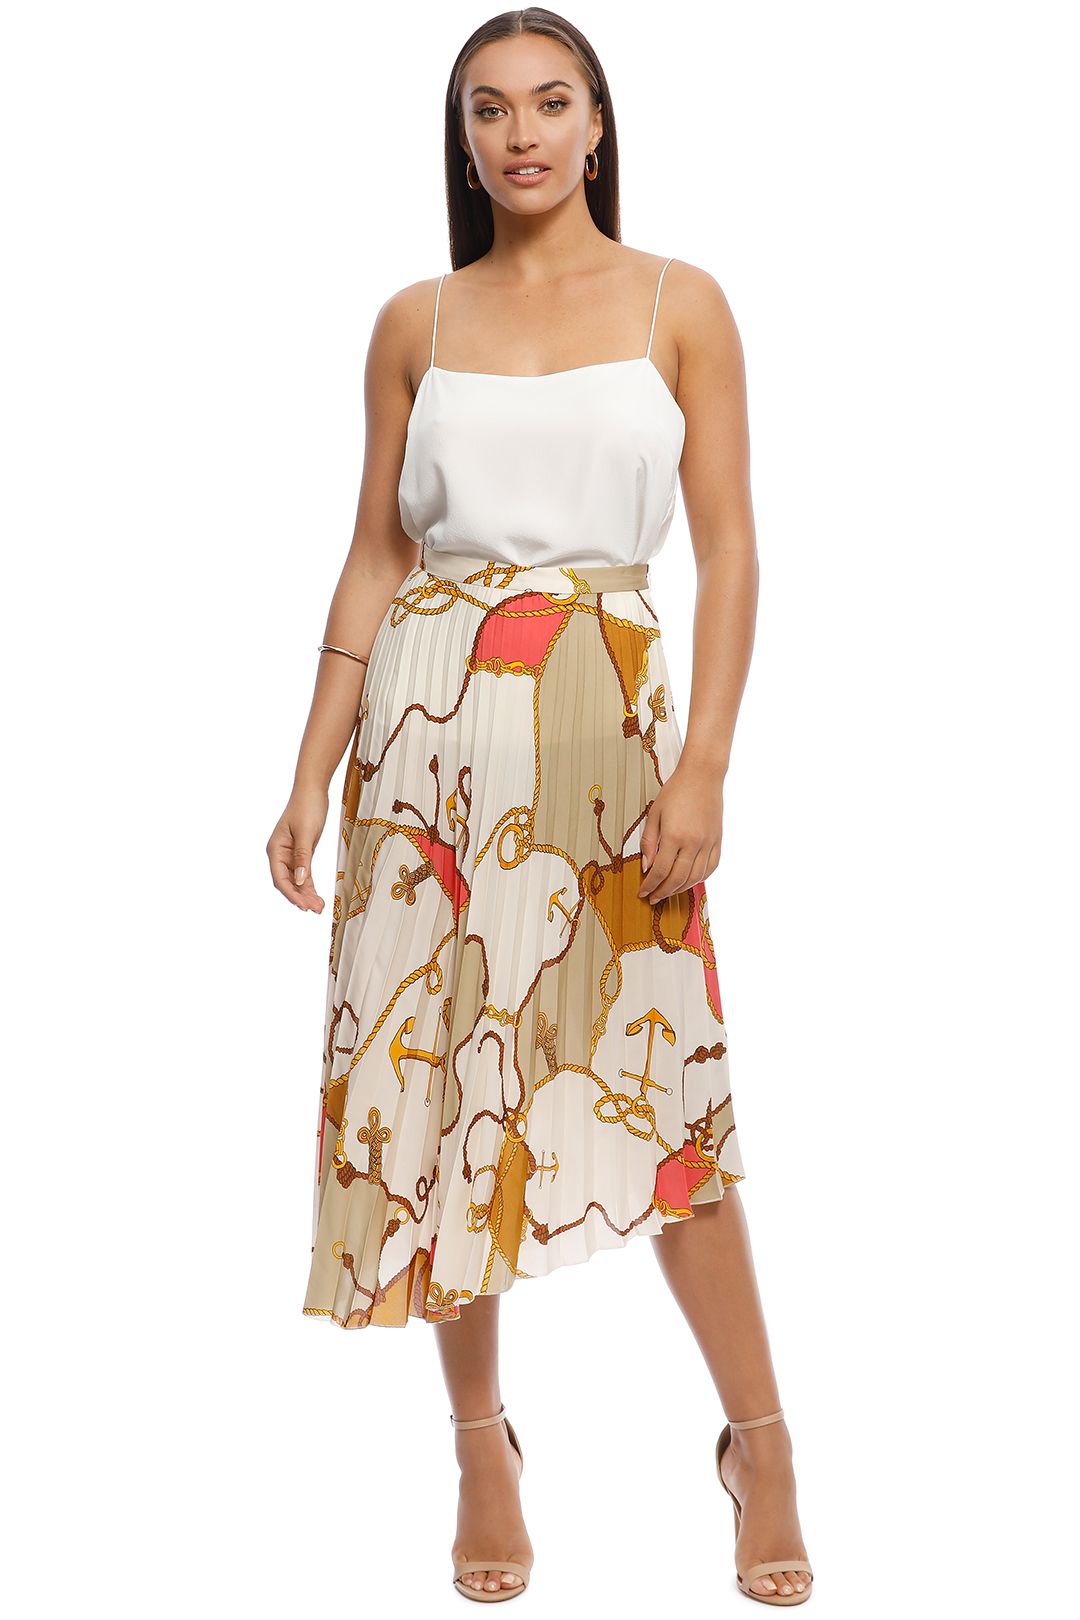 MNG - Naomi Chain Print Skirt - Brown - Front